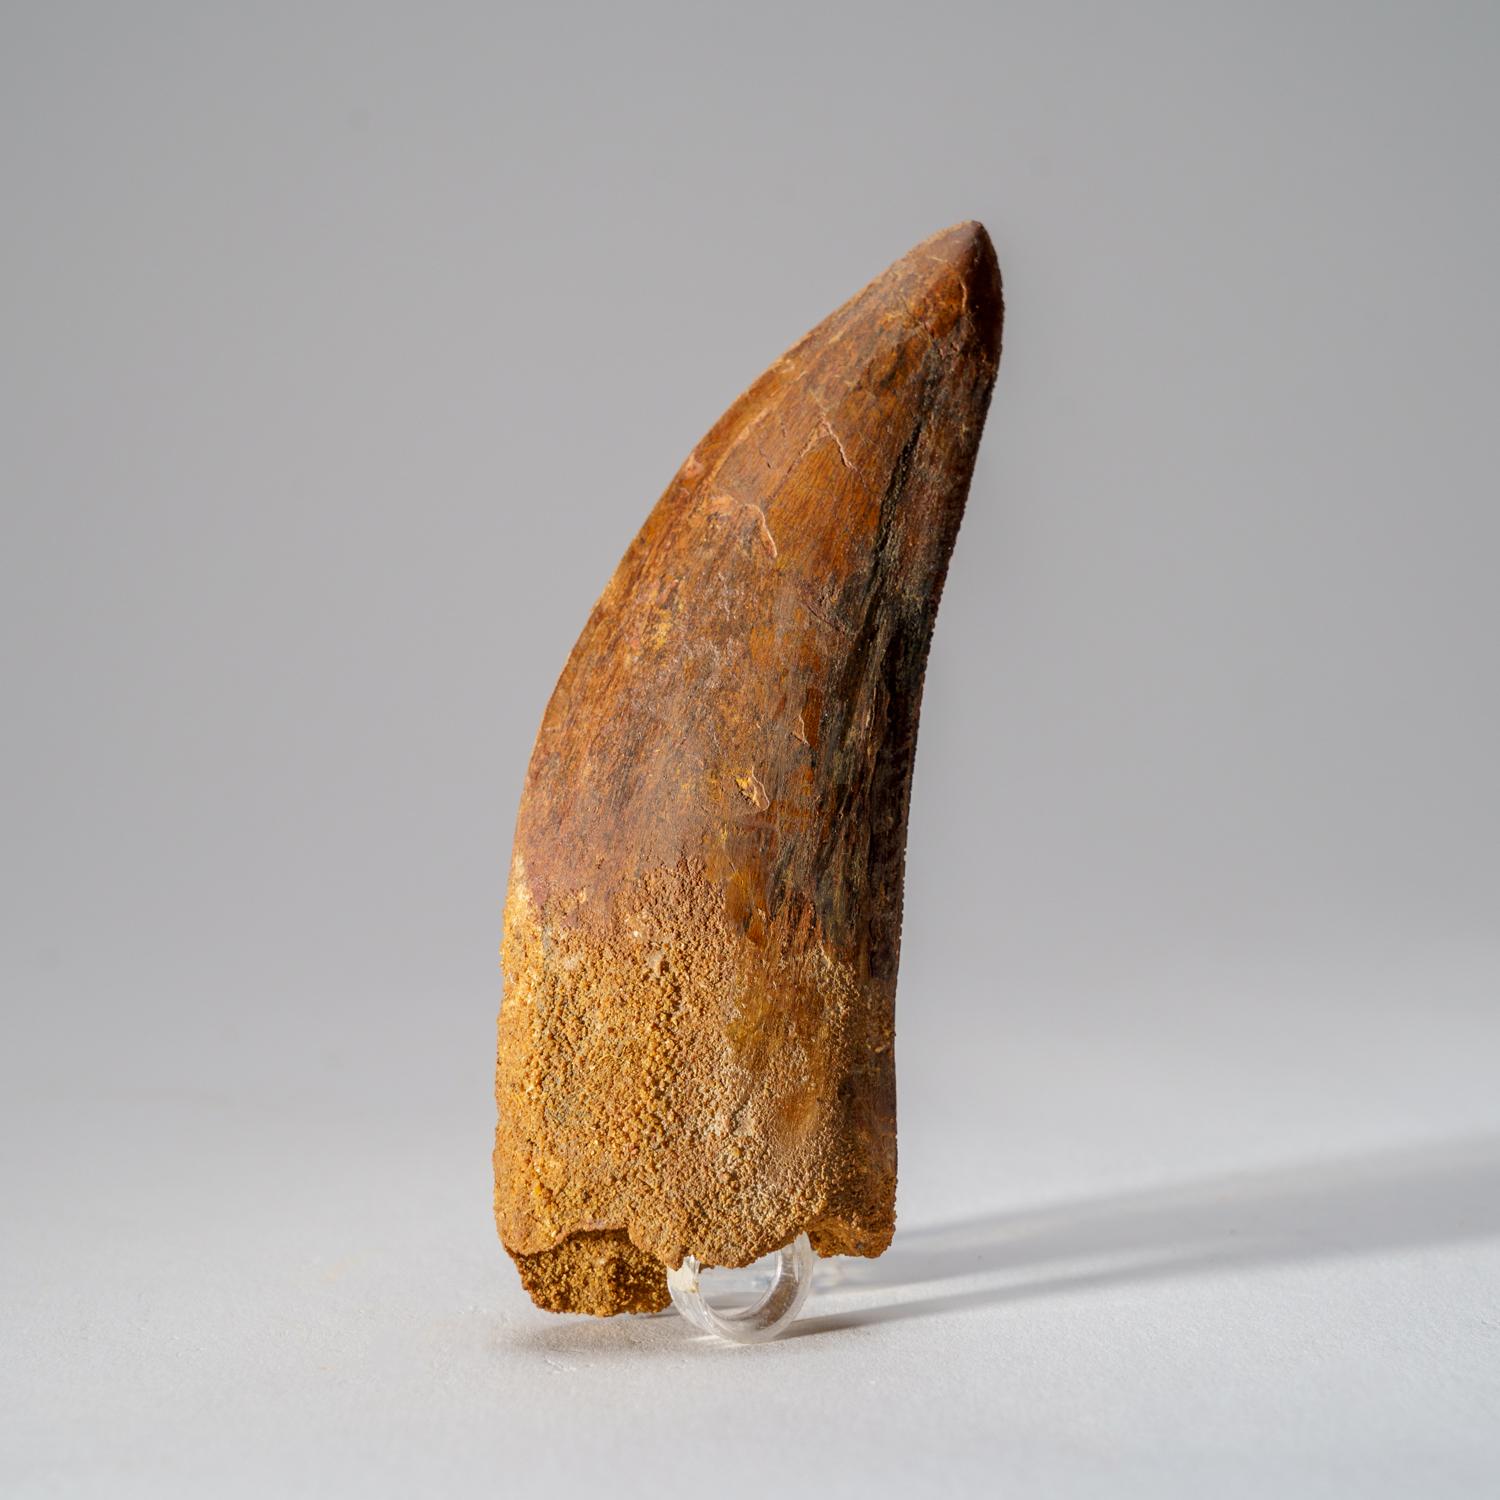 18th Century and Earlier Genuine Carcharodontosaurus Tooth in Display Box (114 grams) For Sale